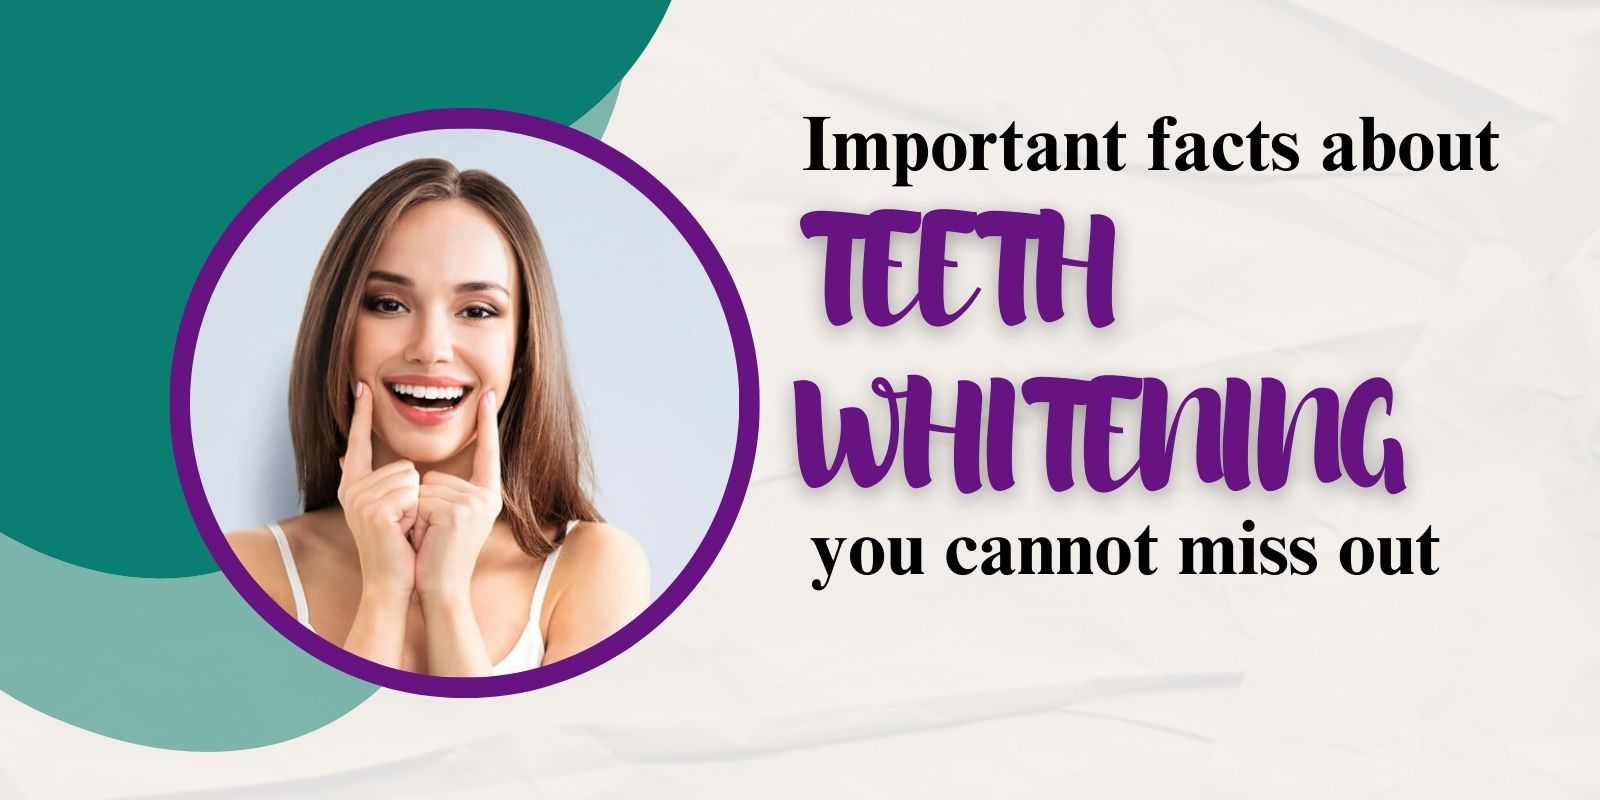 Important facts about teeth whitening you cannot miss out